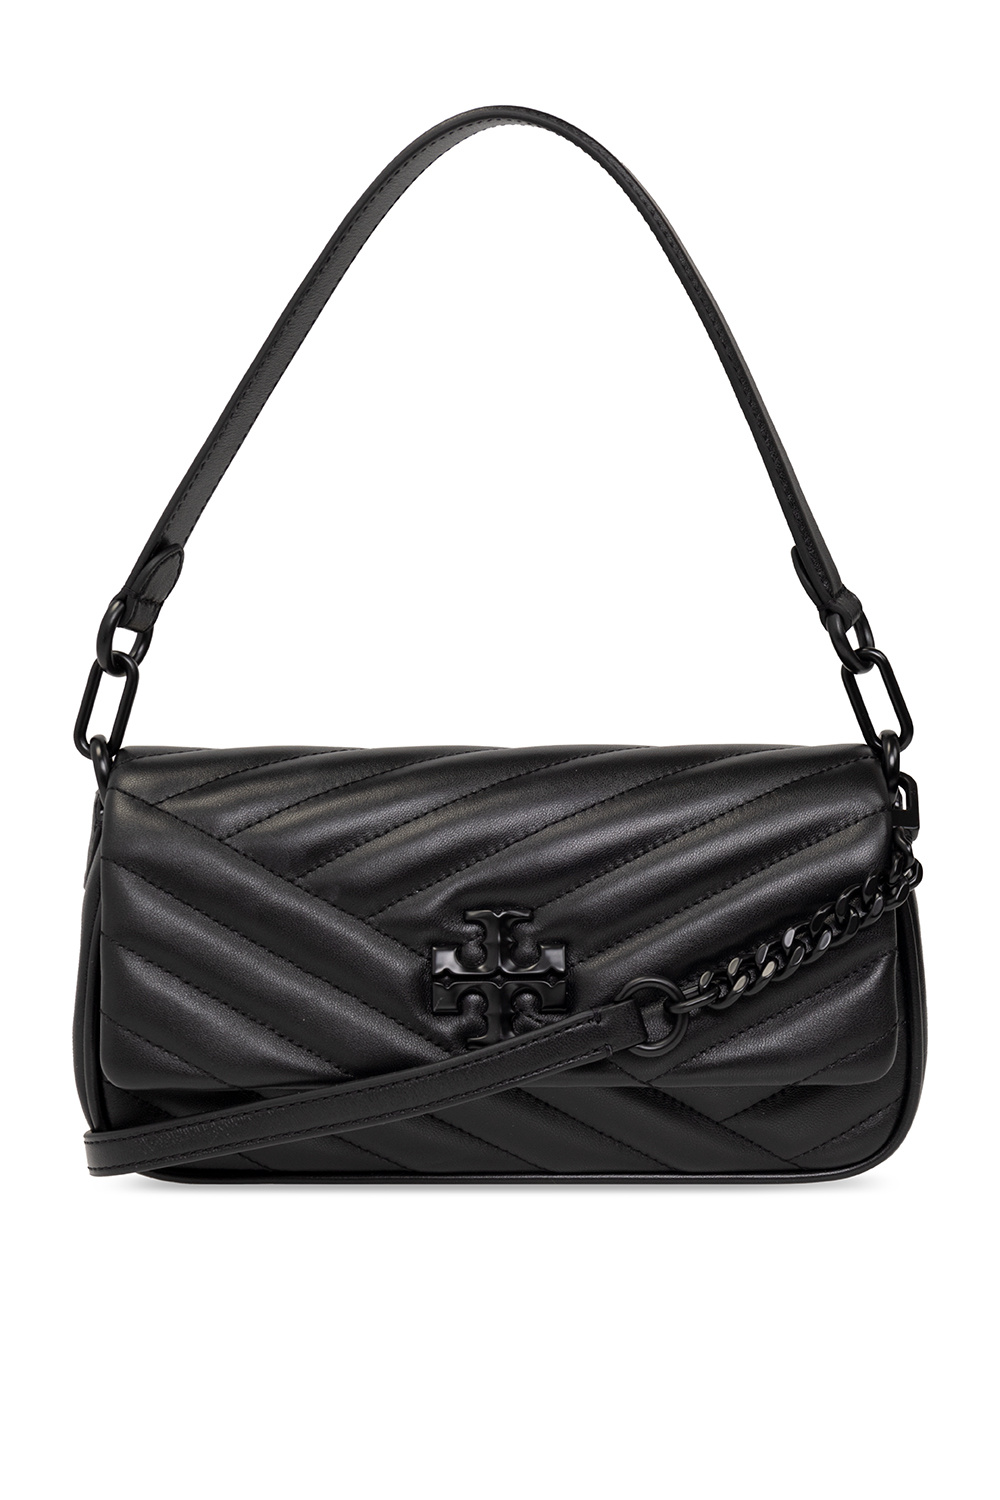 Tory Burch Tory Burch Kira Small Chevron Shoulder Bag In Gray Quilted  Leather Grey: Handbags